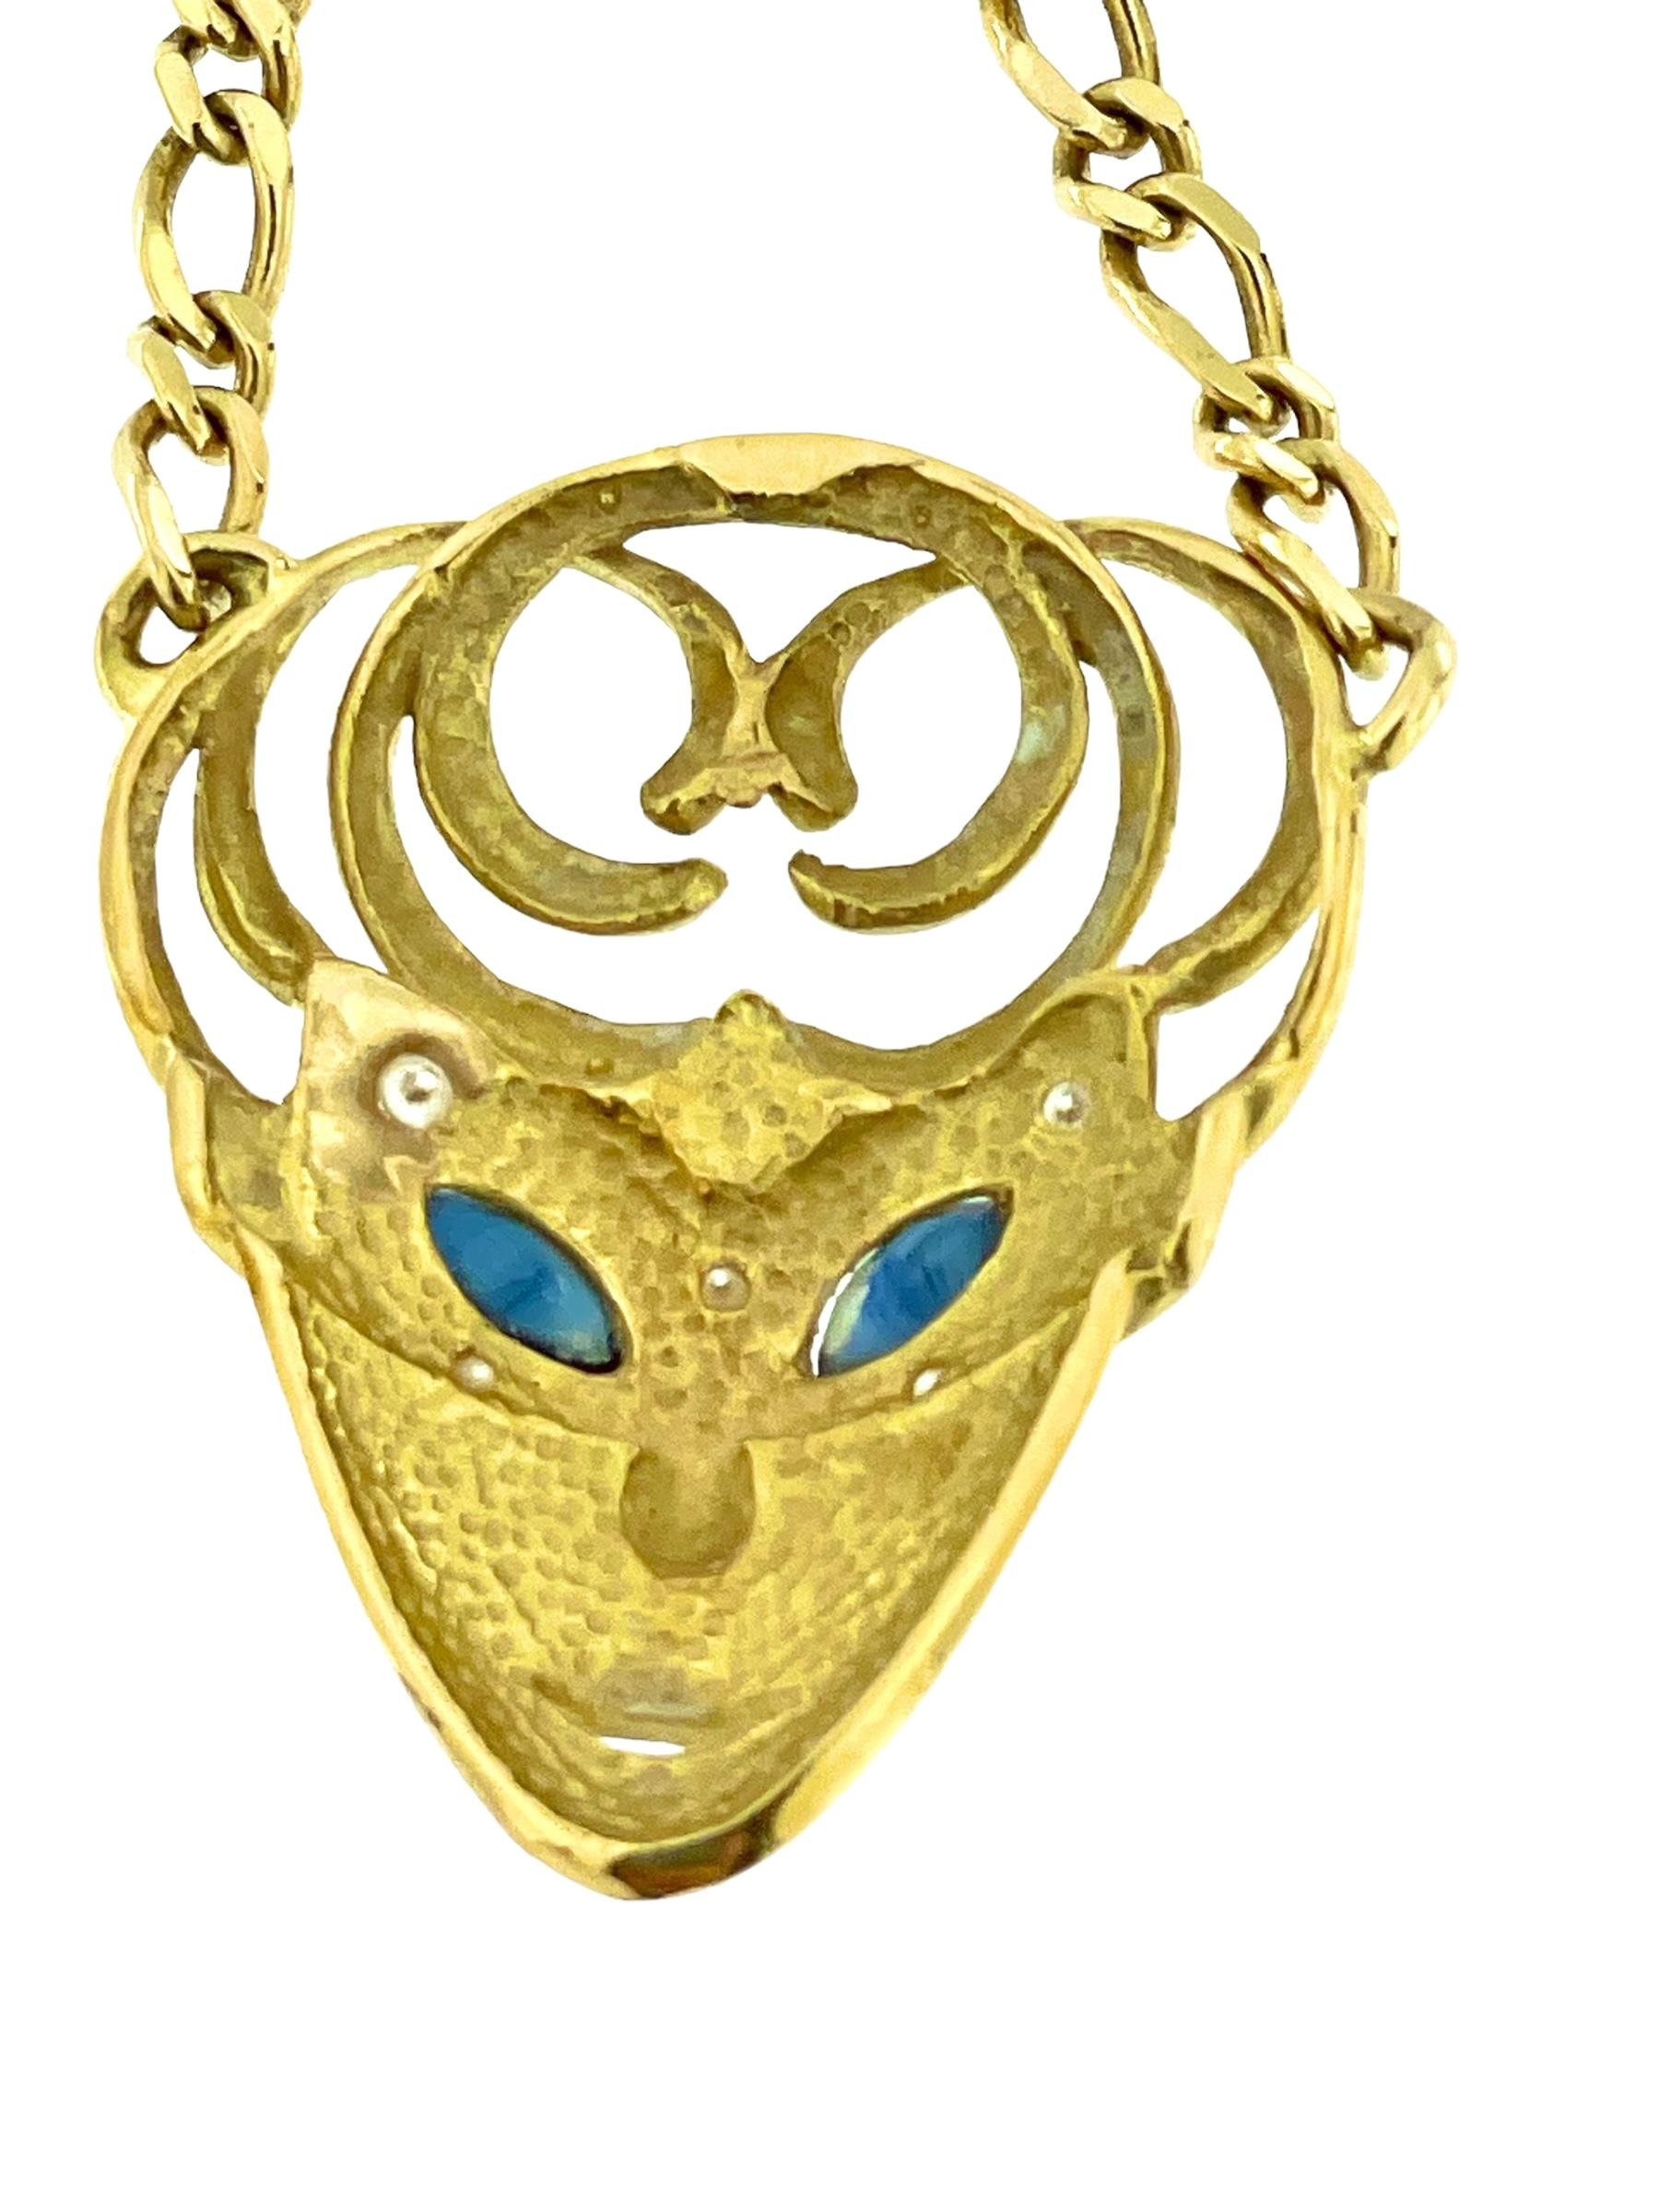 Modern Italian Necklace with Venetian Mask Pendant Yellow Gold Diamonds and Sapphires For Sale